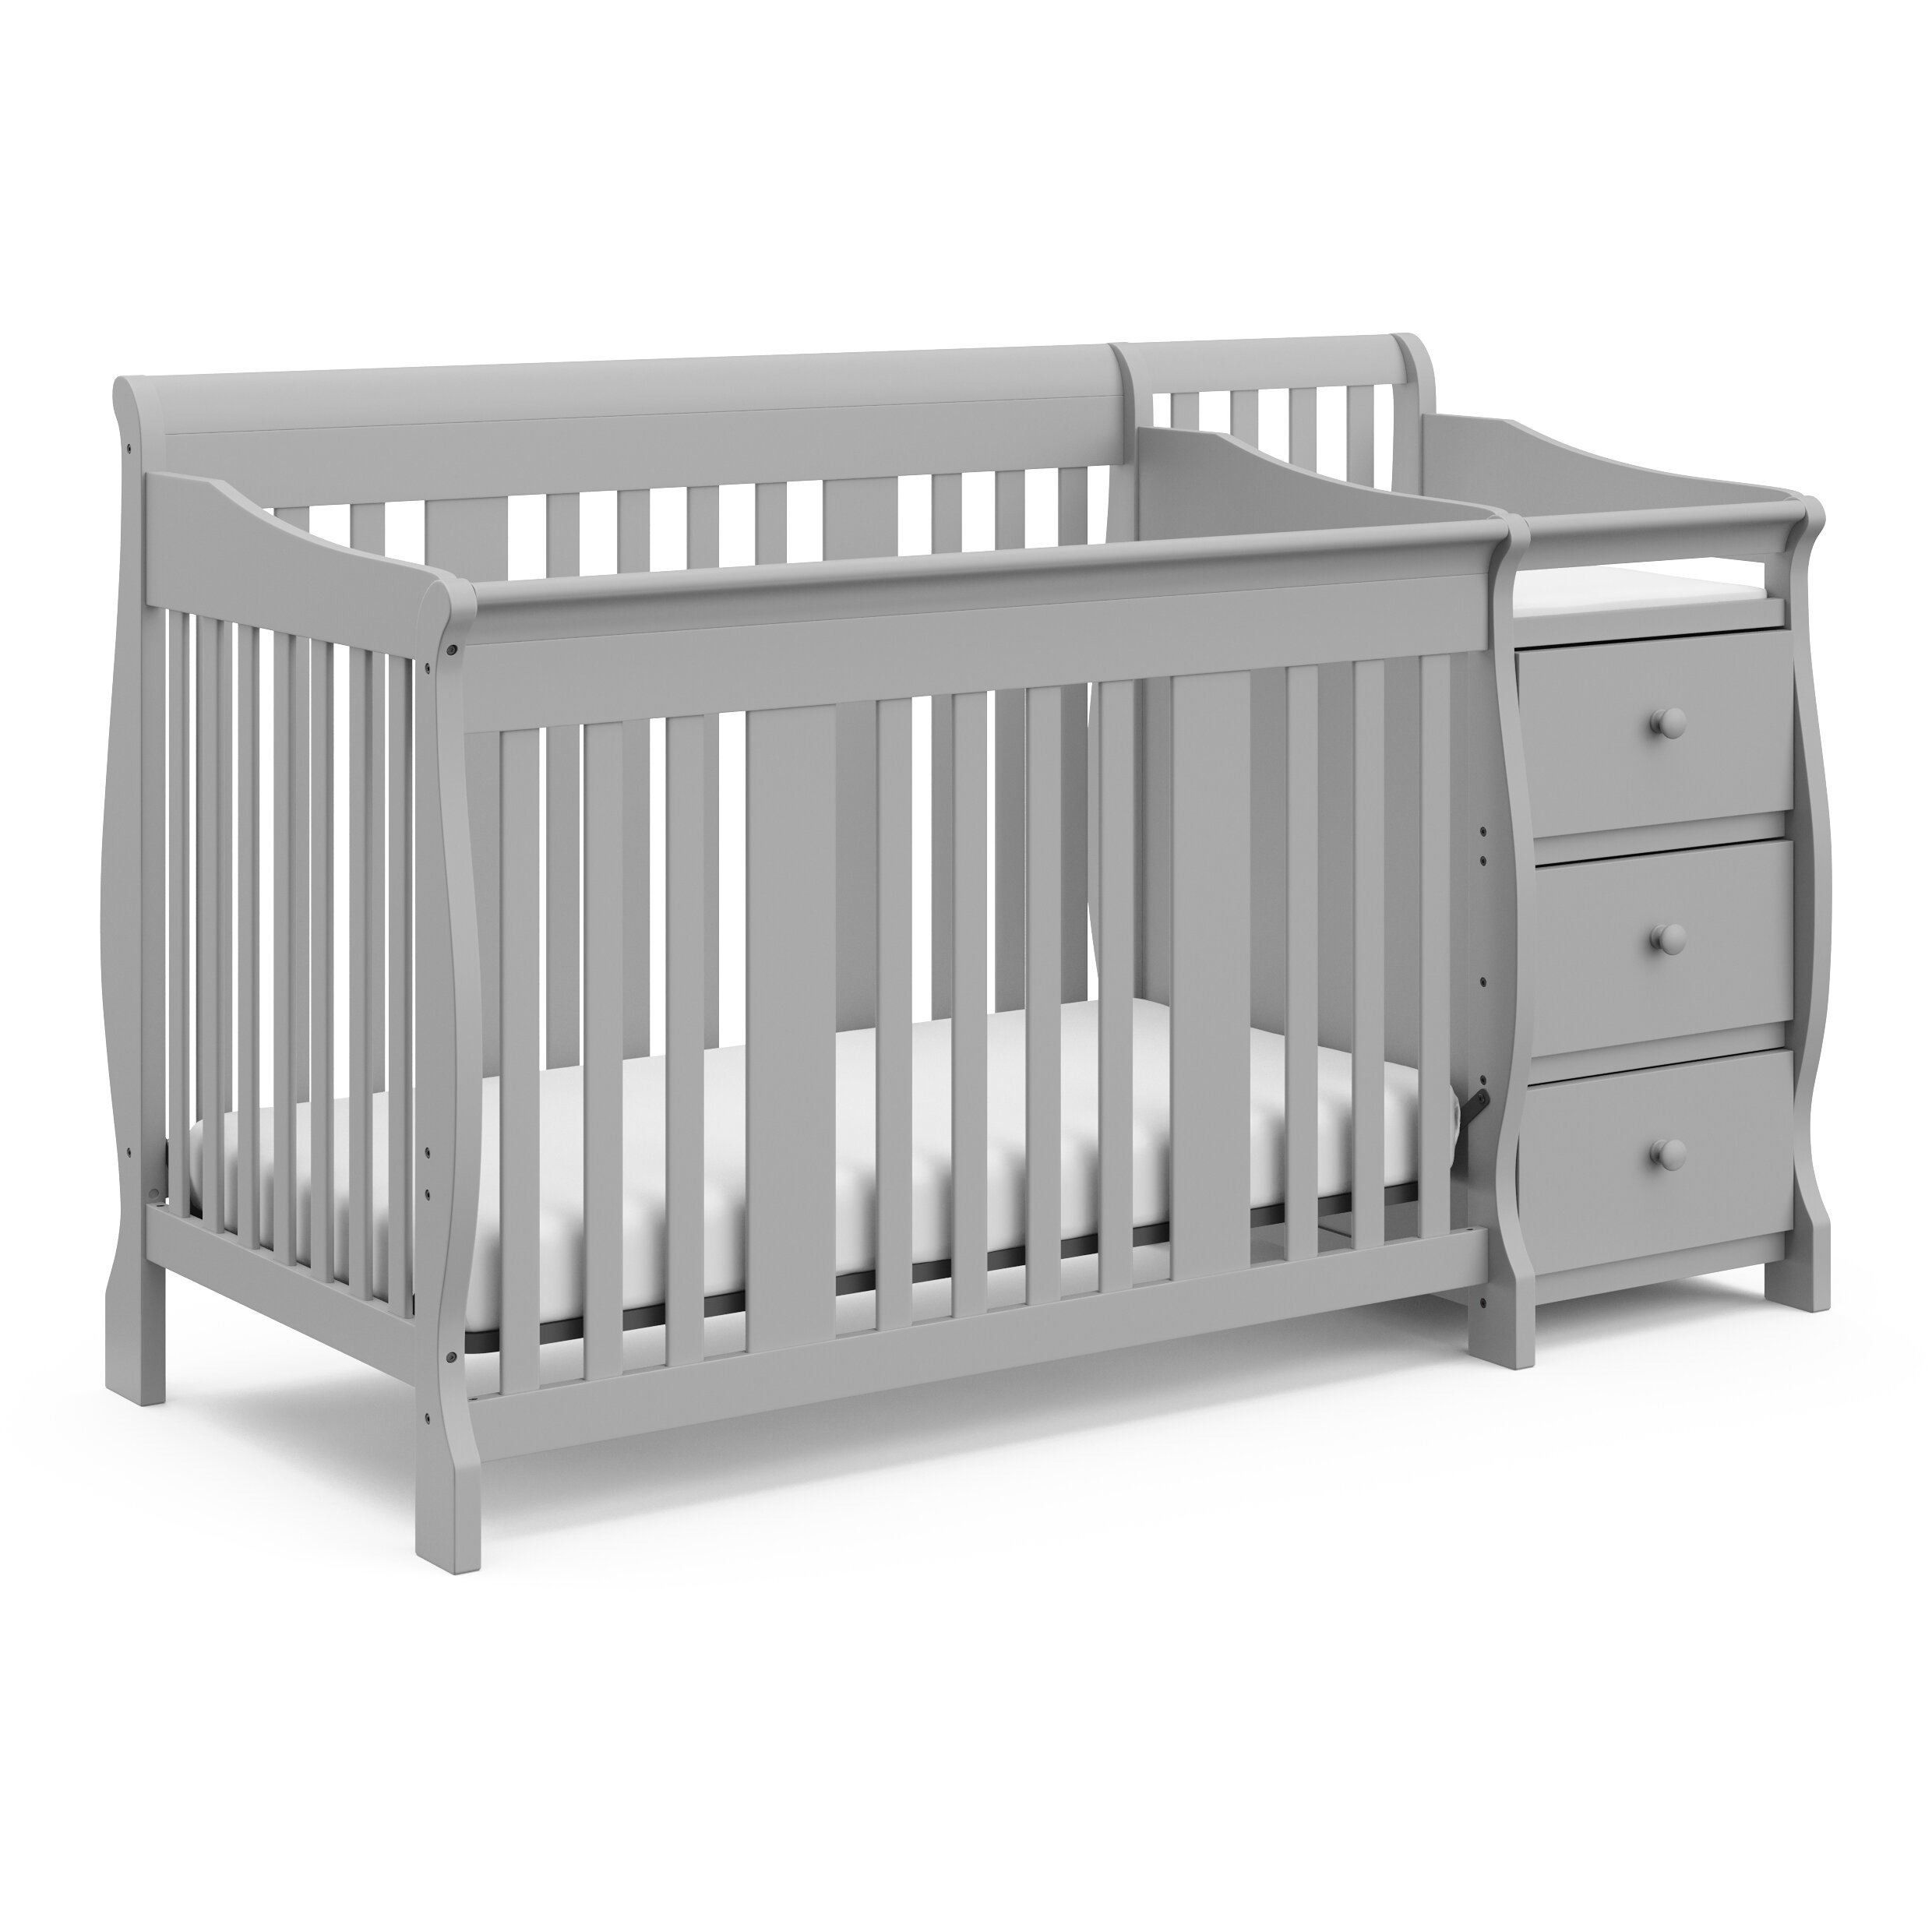 Storkcraft Portofino 4-in-1 Fixed Side Convertible Crib and Changer Three Position Adjustable Height Mattress Easily Converts to Toddler Bed Day Bed or Full Bed Espresso Mattress Not Included 